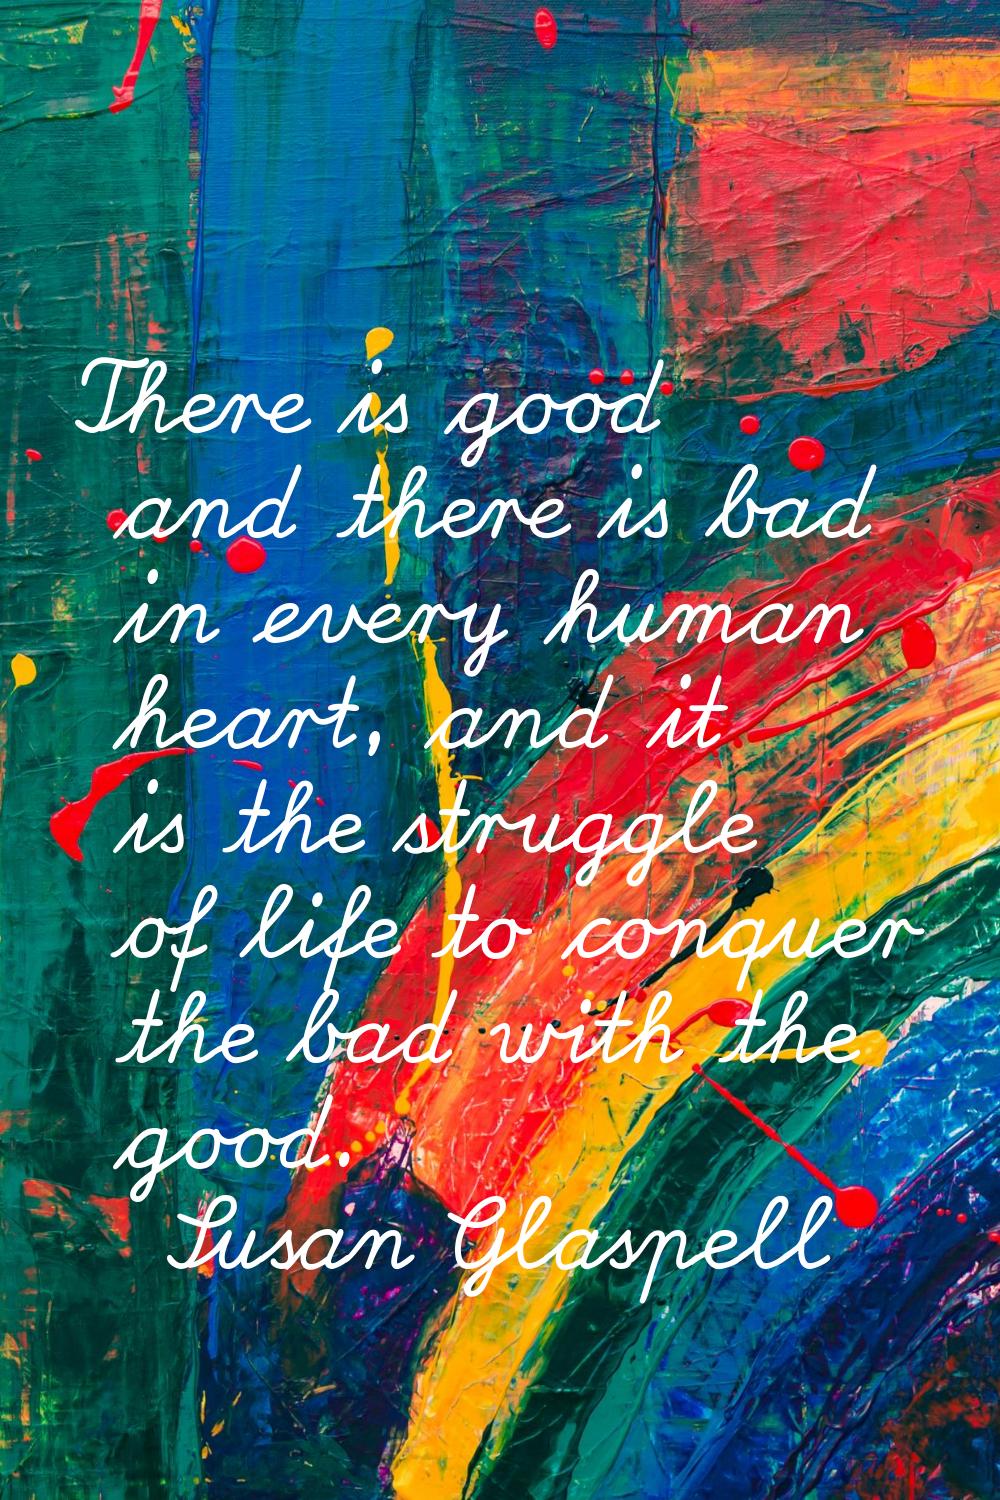 There is good and there is bad in every human heart, and it is the struggle of life to conquer the 